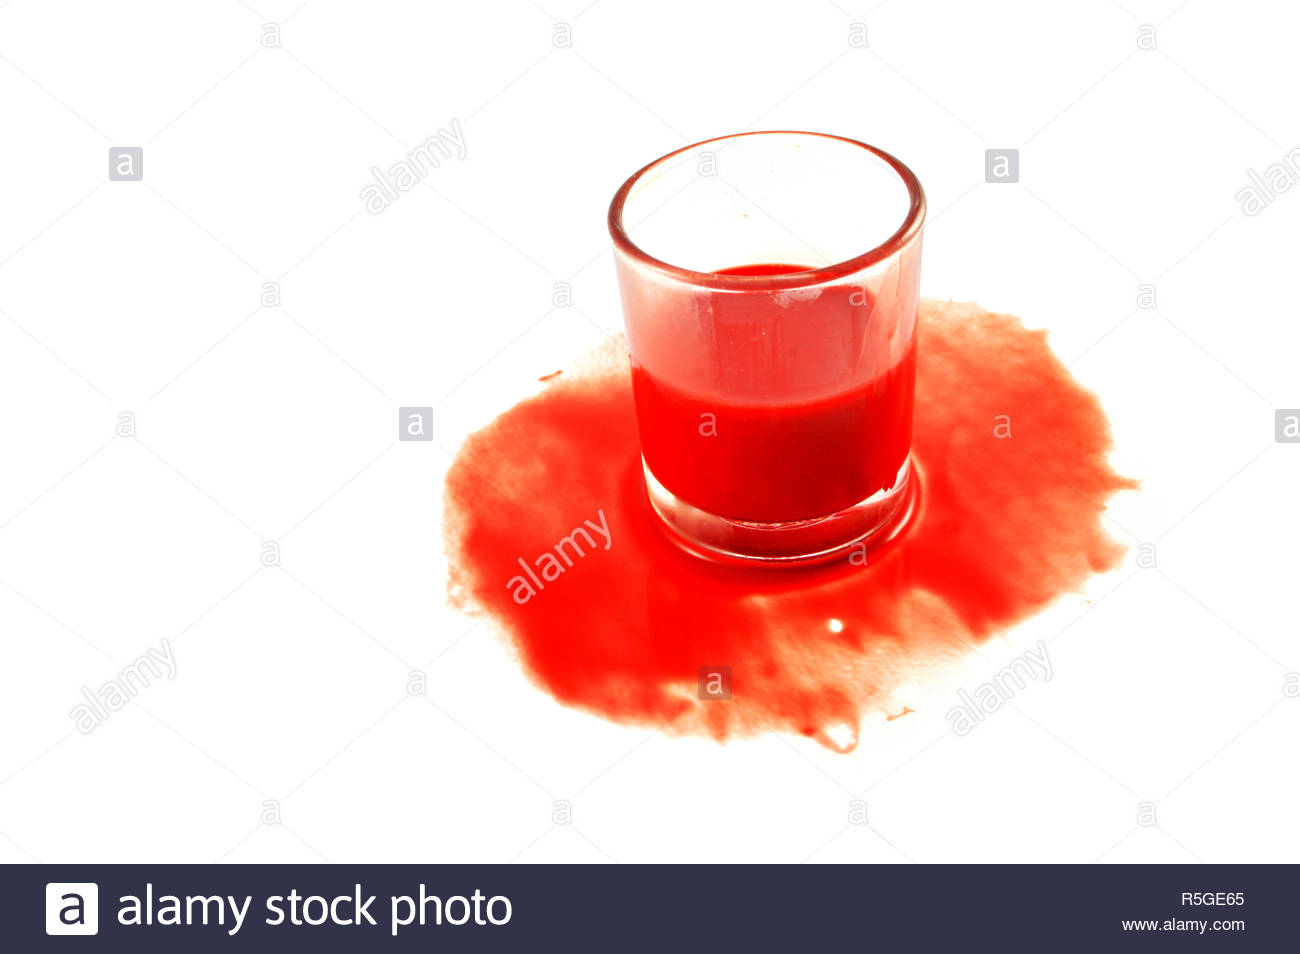 Bleeding Blood In The Glass On White Background Concept Of